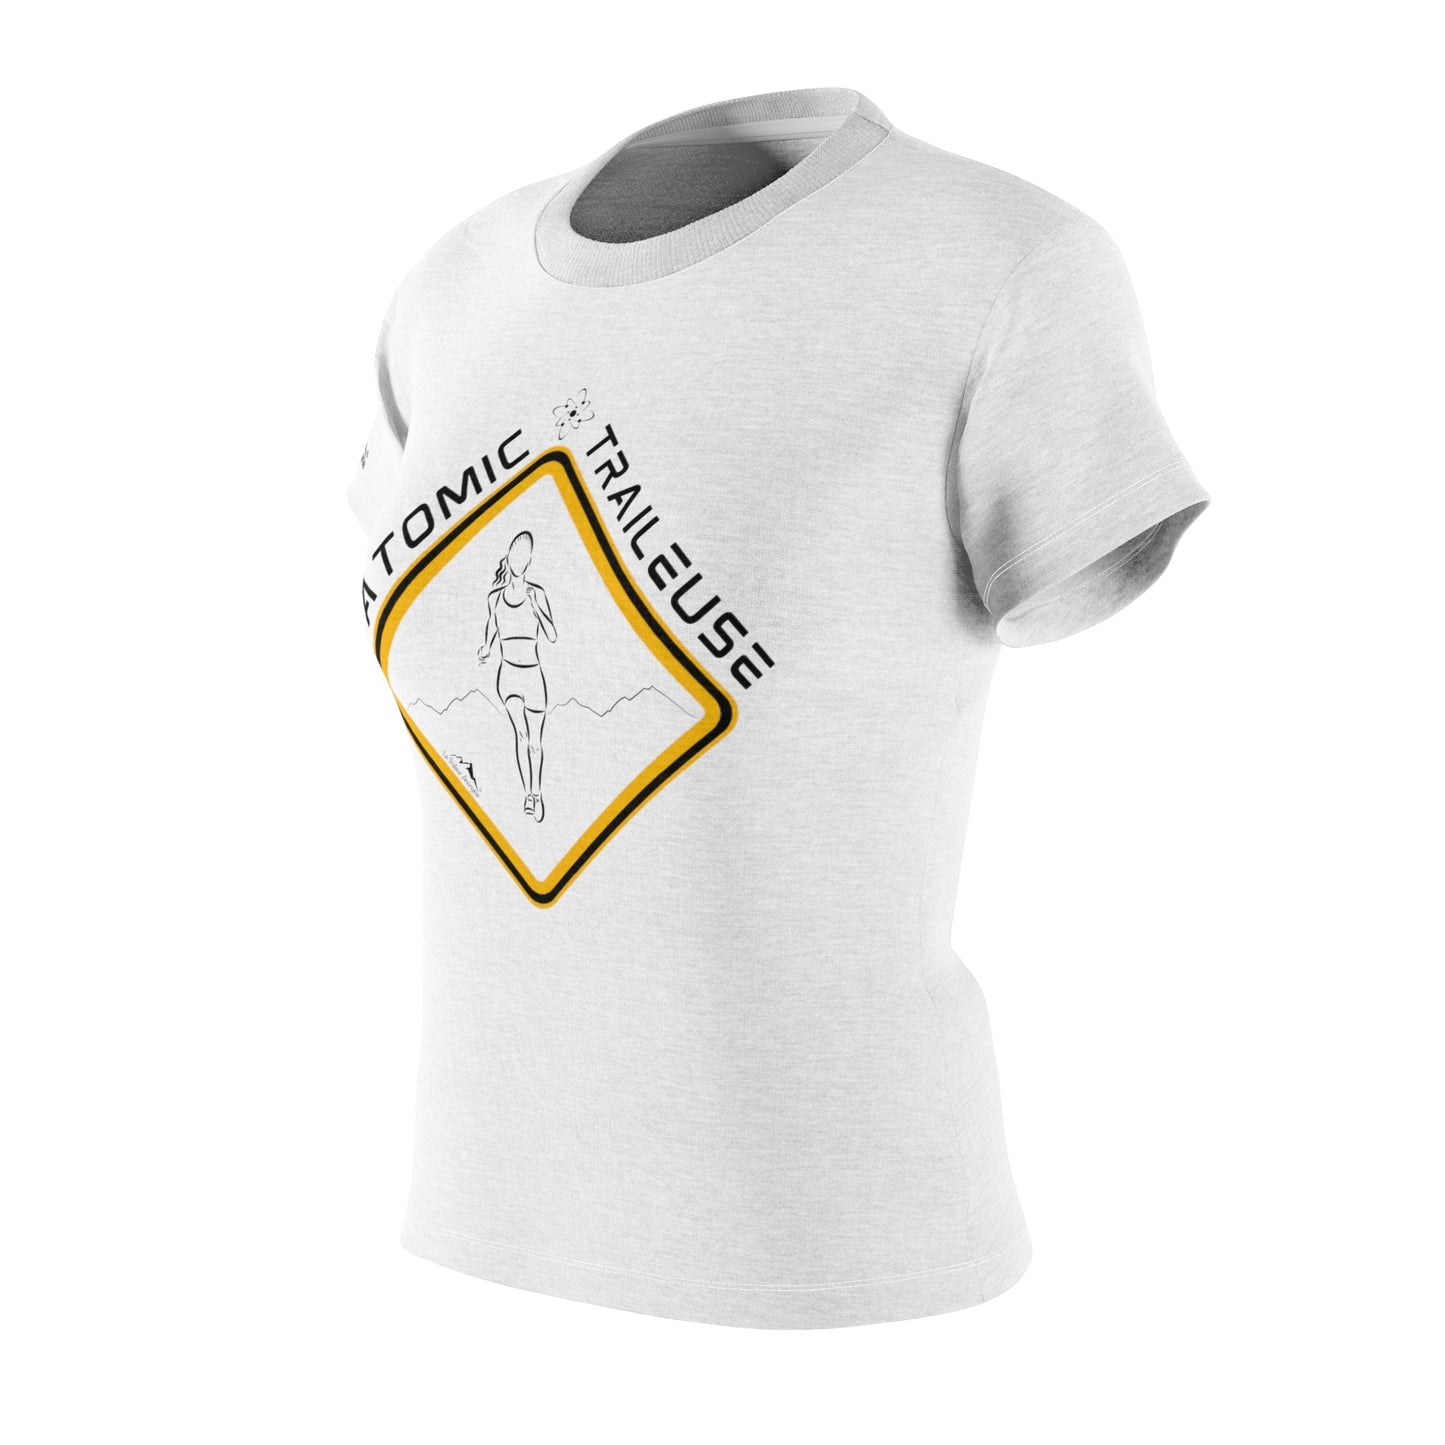 T-Shirt Running - Femme - Collection "Atomic" - Le Traileur Anonyme